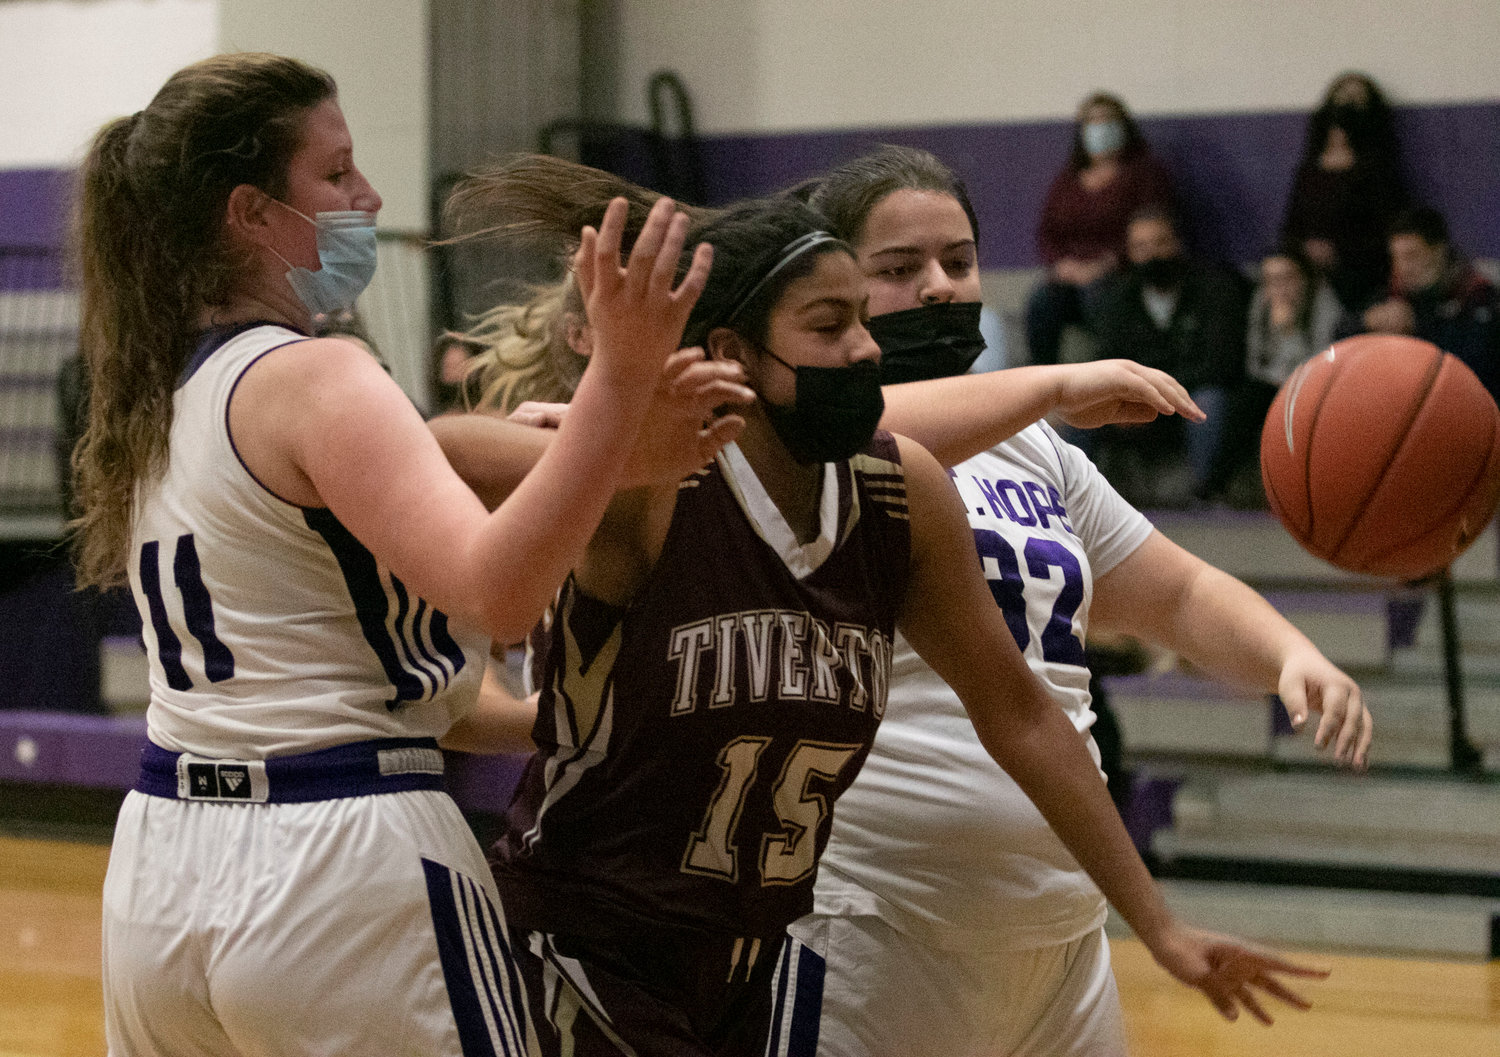 Emma Lopes grabs a rebound in the first half.